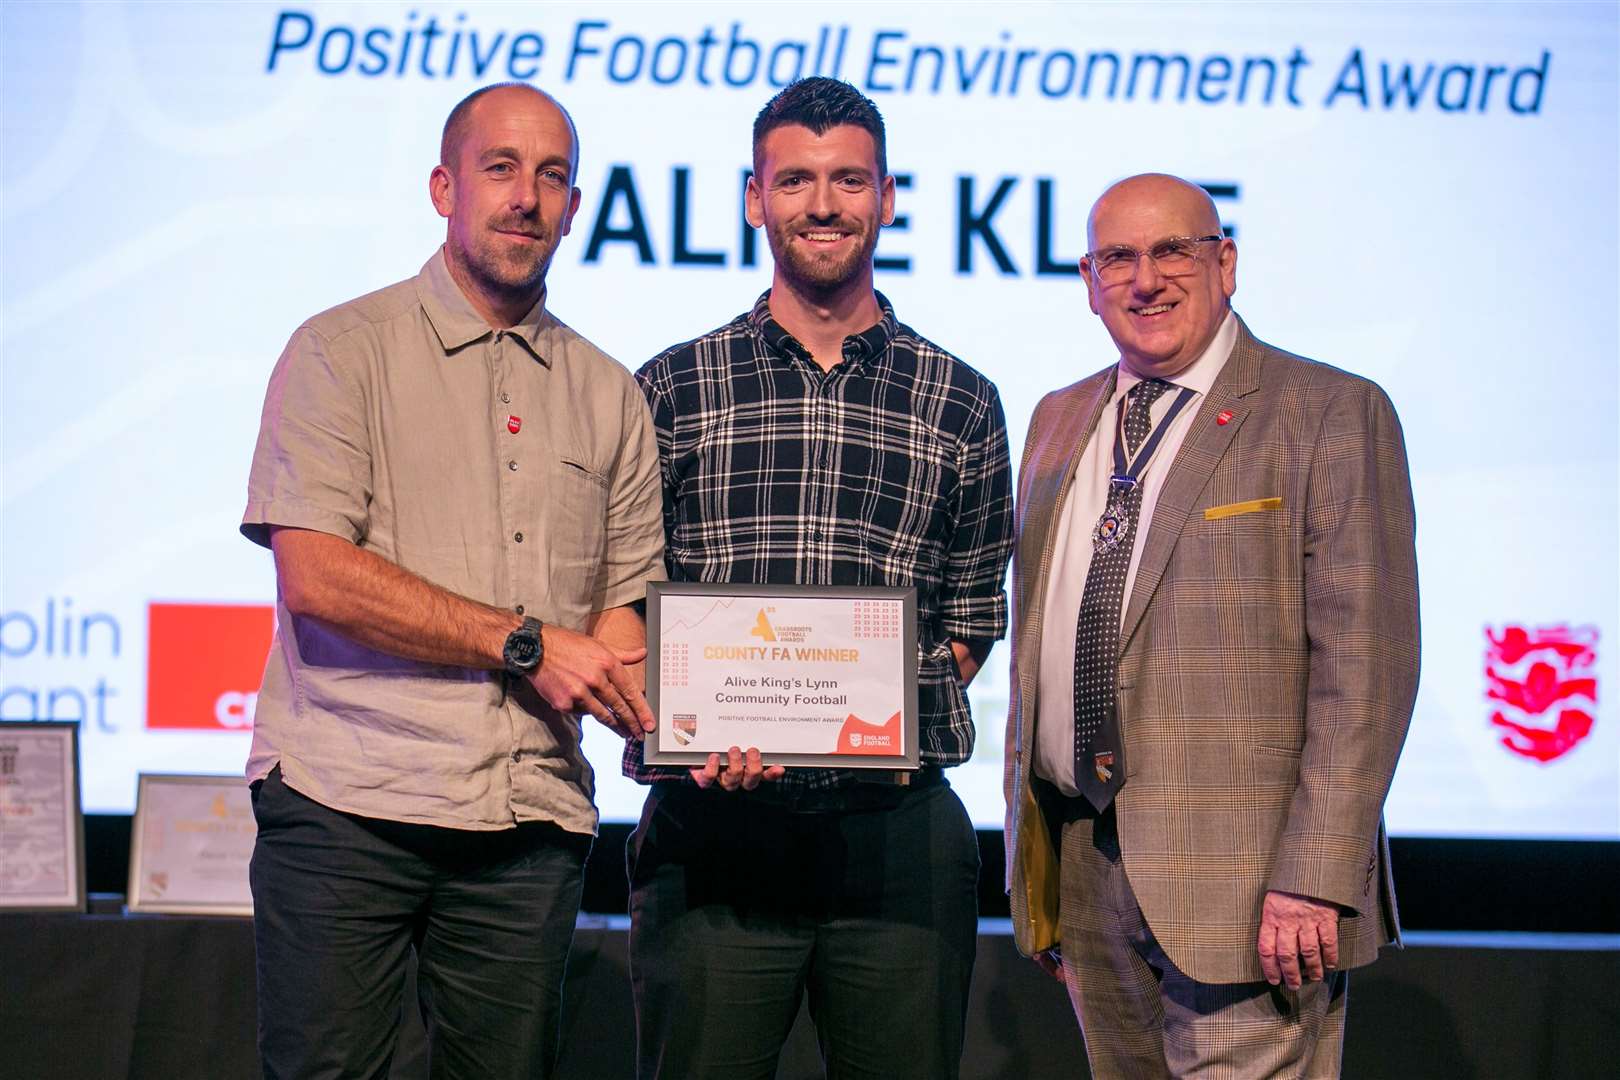 Norfolk Grassroots Football Awards, at The Space in Norwich. Pictured above, from left, is Football Development Manager Dan Buhlemann, Football and Community Development Officer Grant Cotton and Norfolk FA chairman Michael Banham